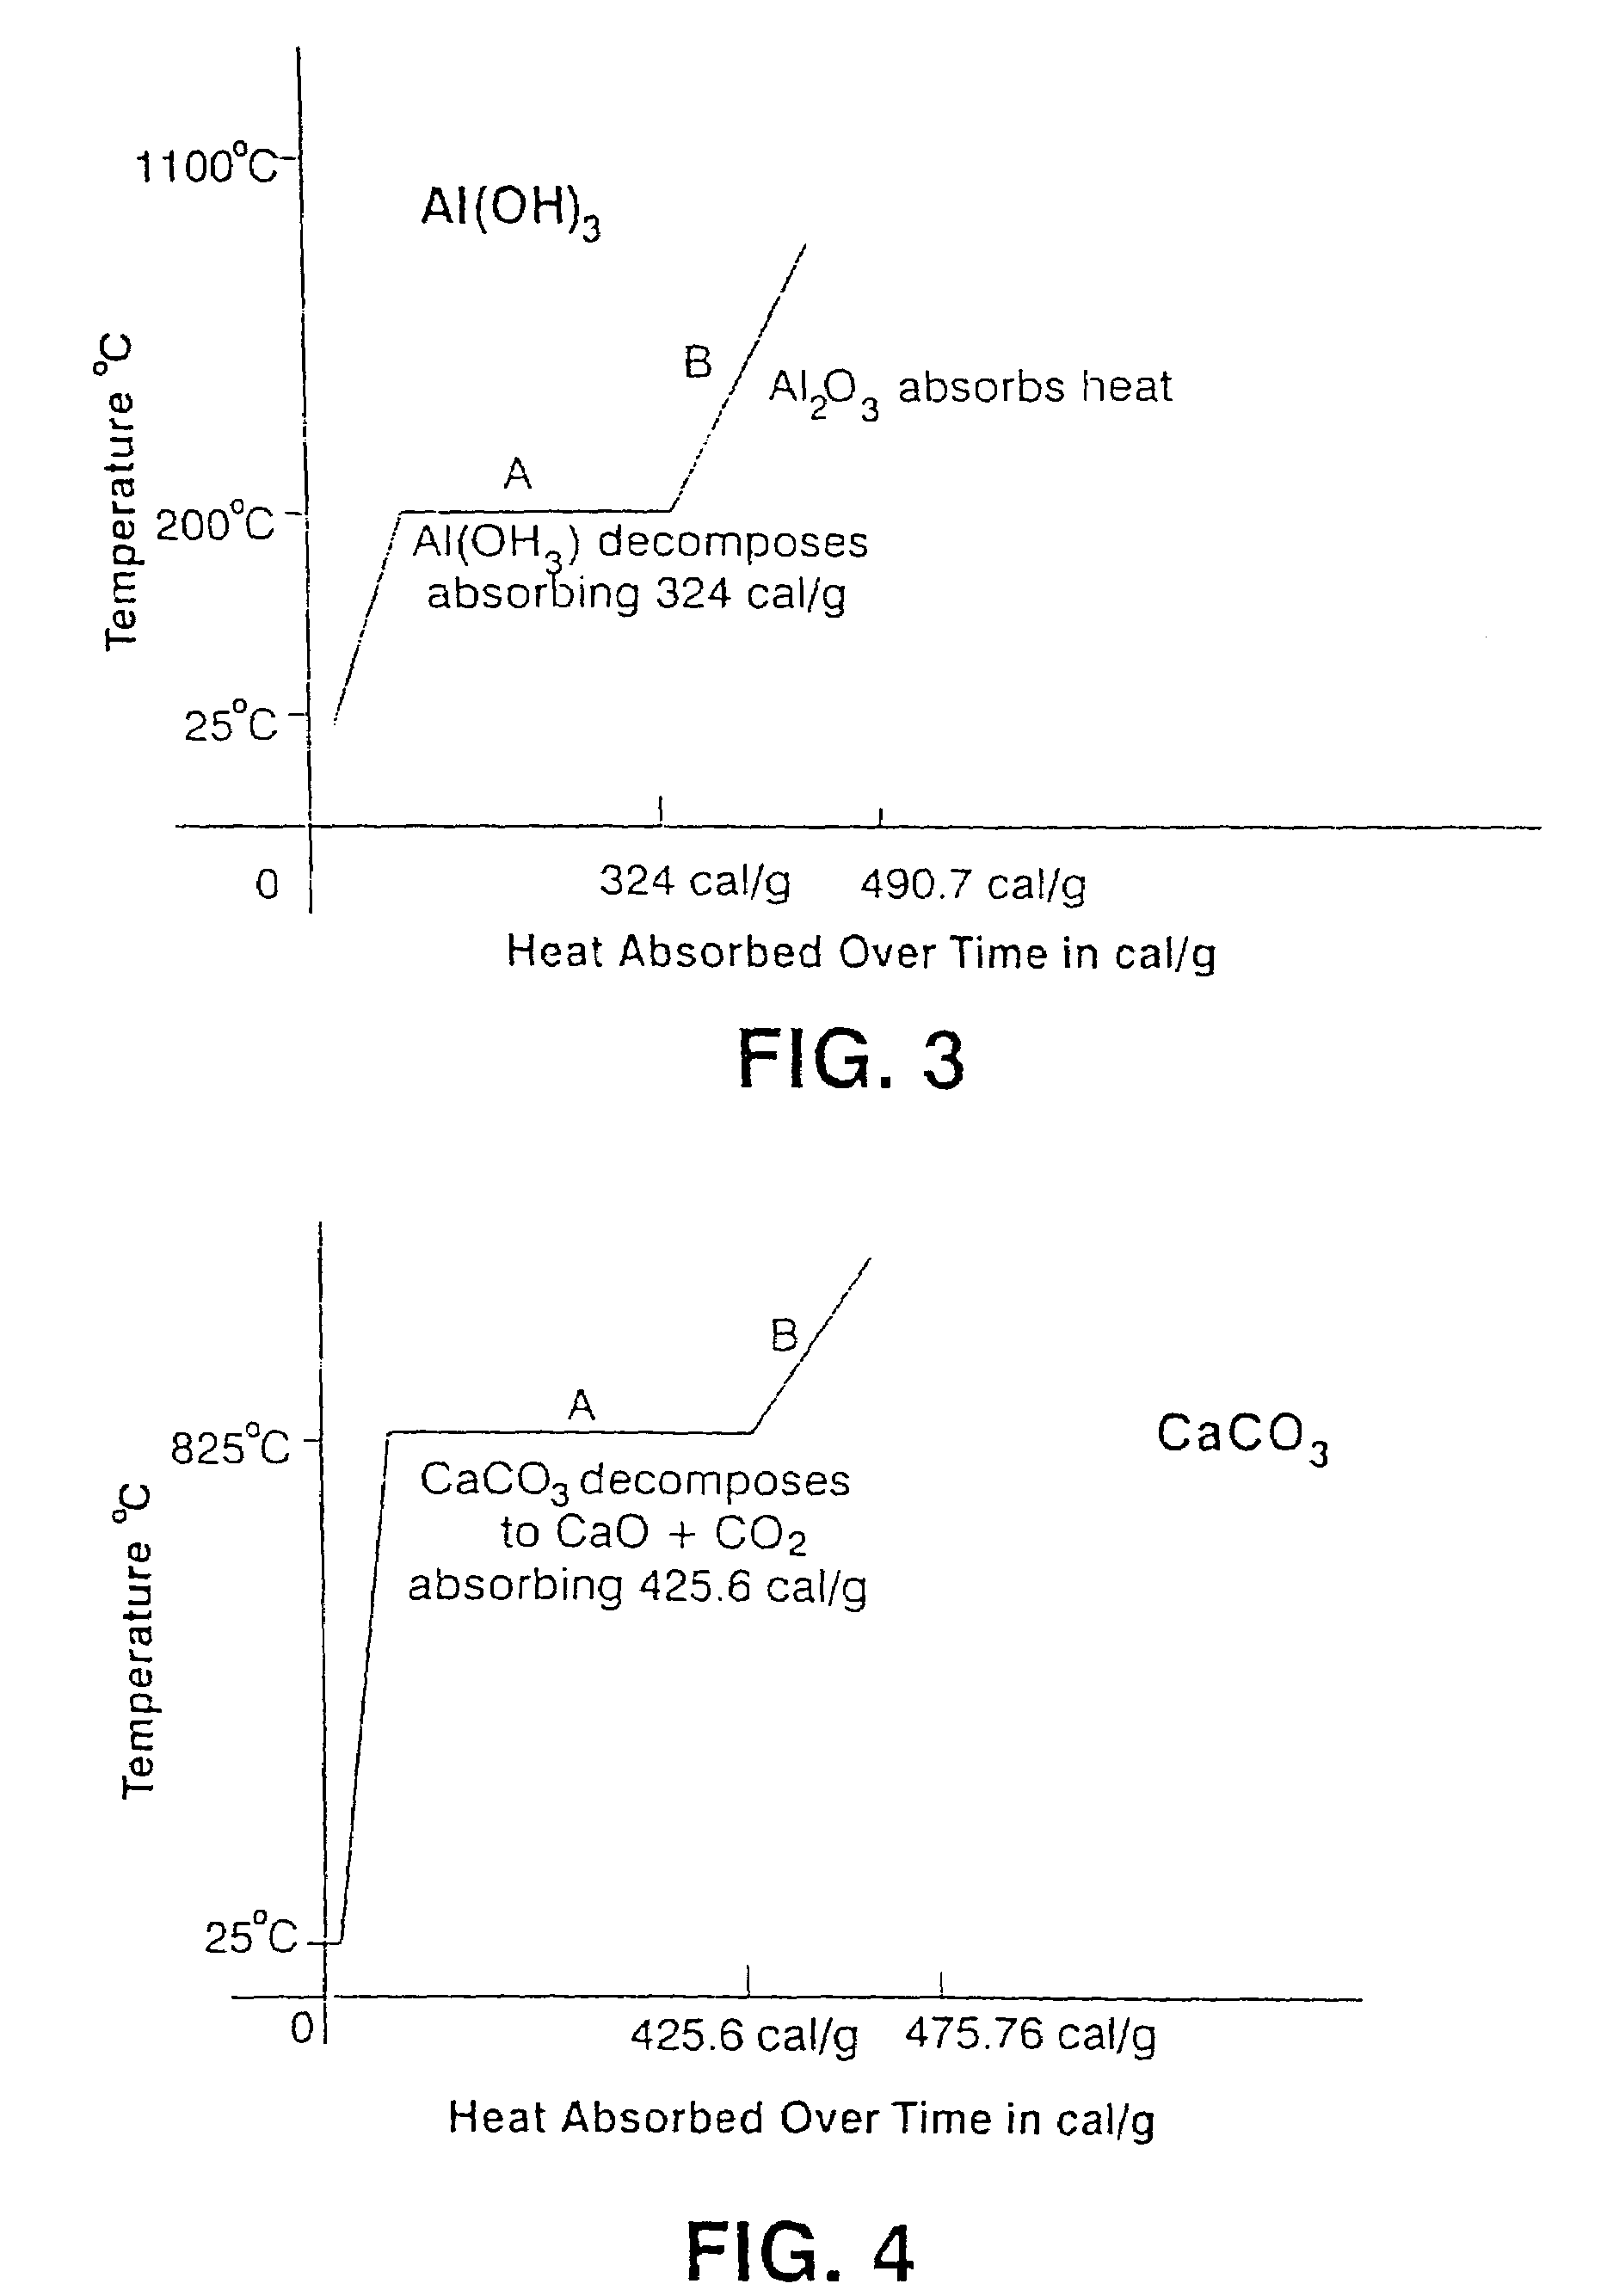 Heat absorbing temperature control devices that include hydroxide